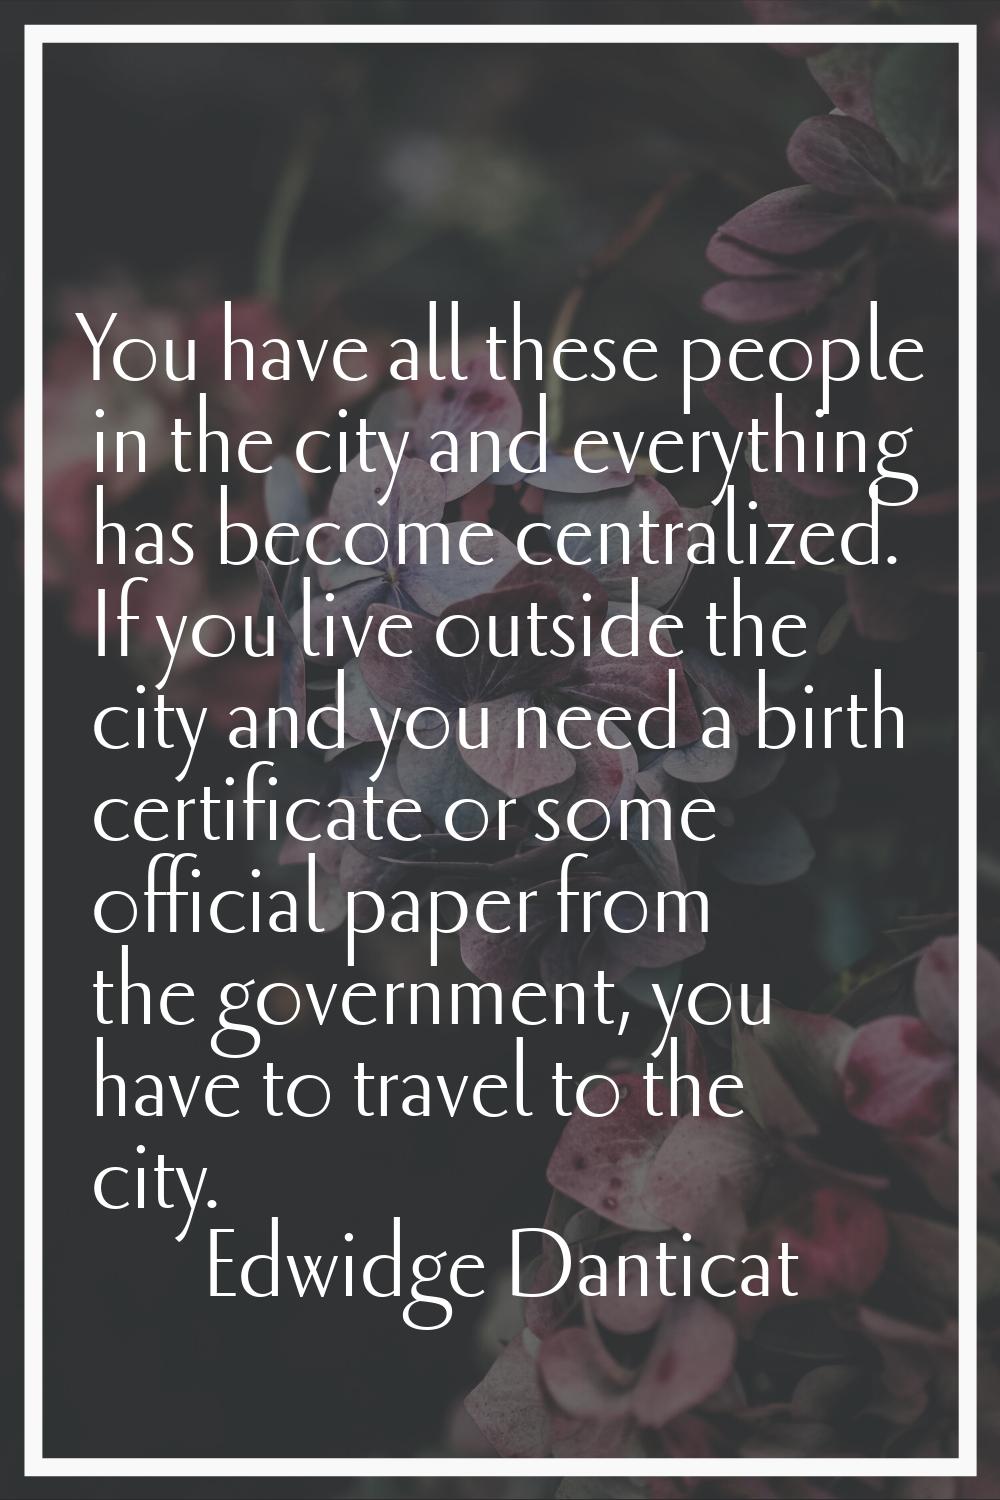 You have all these people in the city and everything has become centralized. If you live outside th